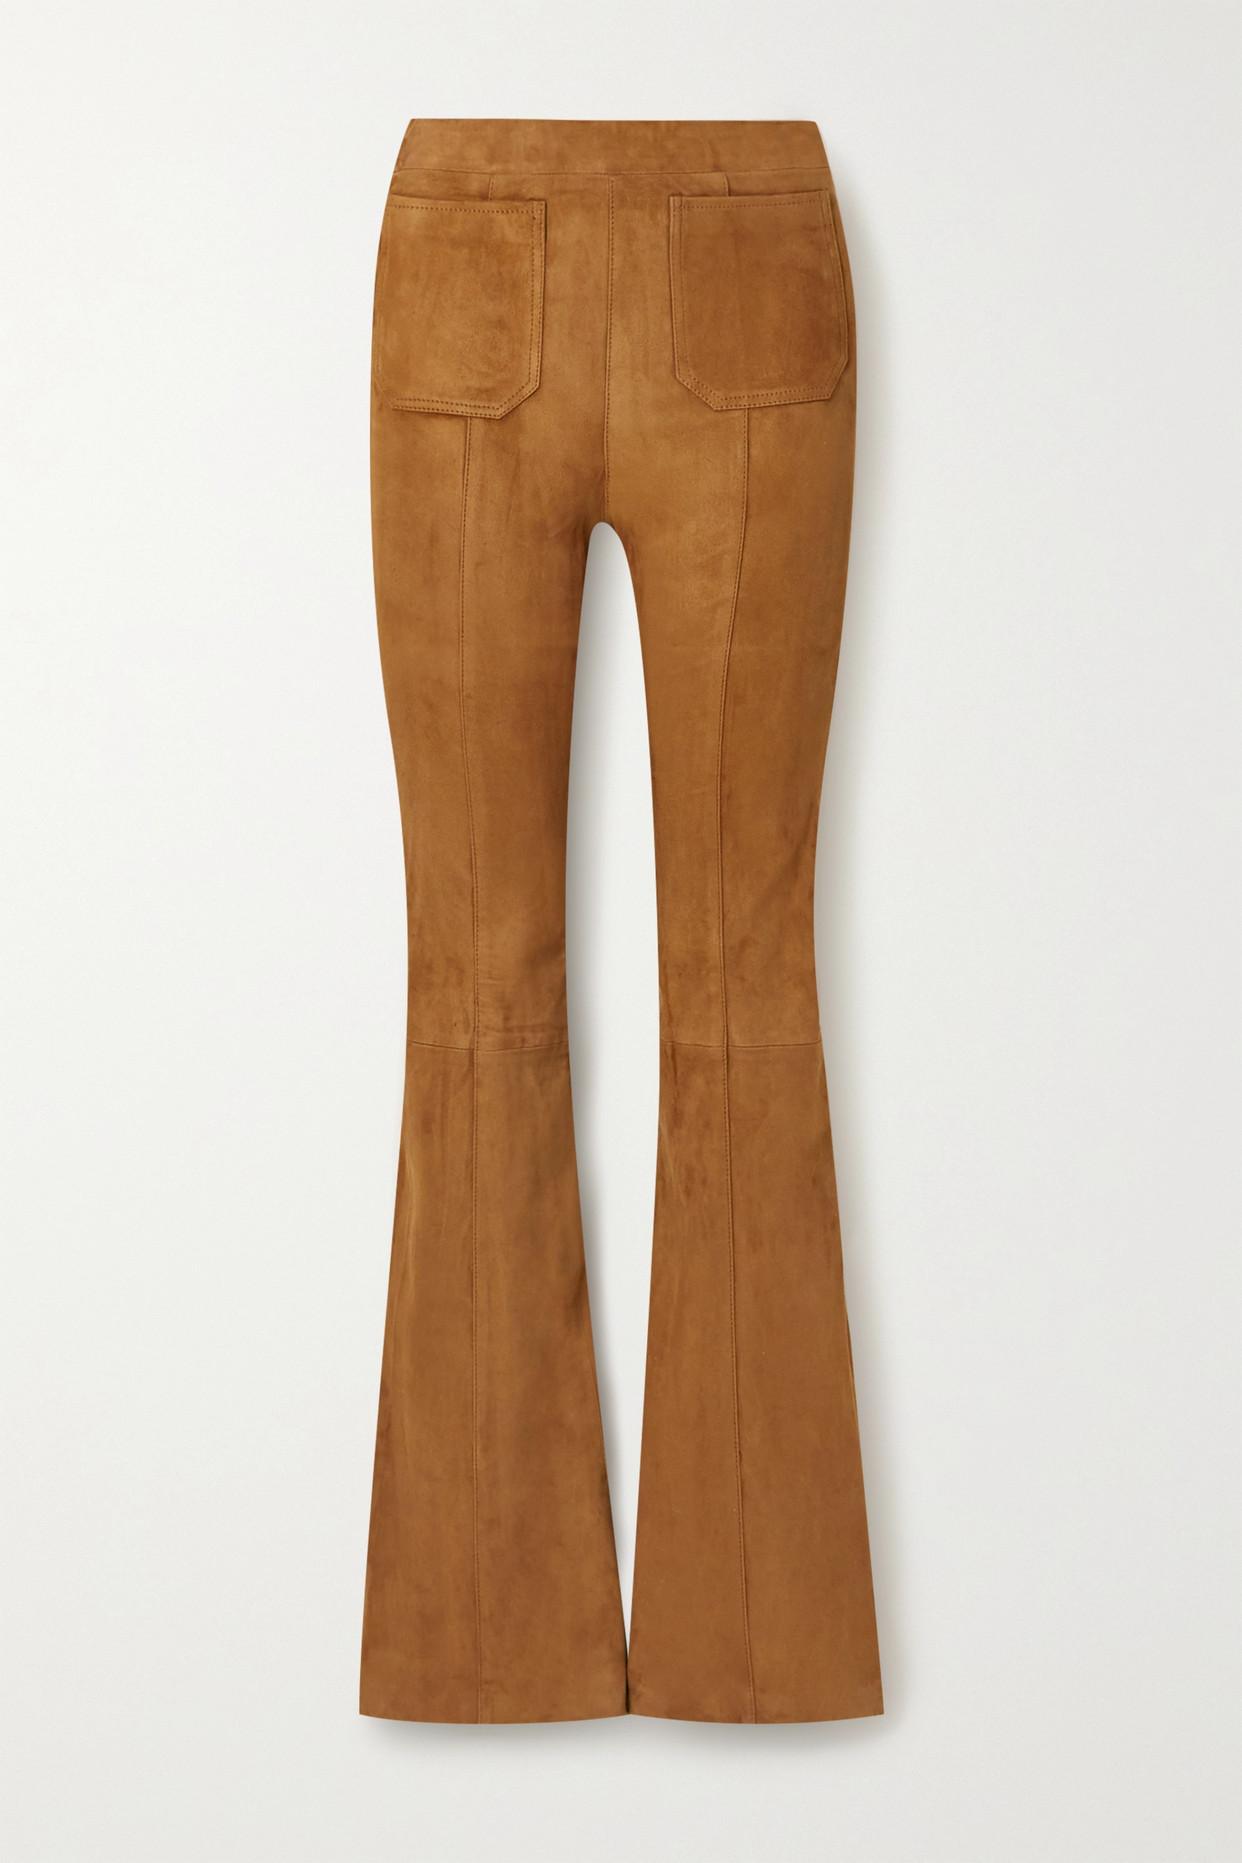 Current Mood Faux Suede Flare Pants - Brown/Tan